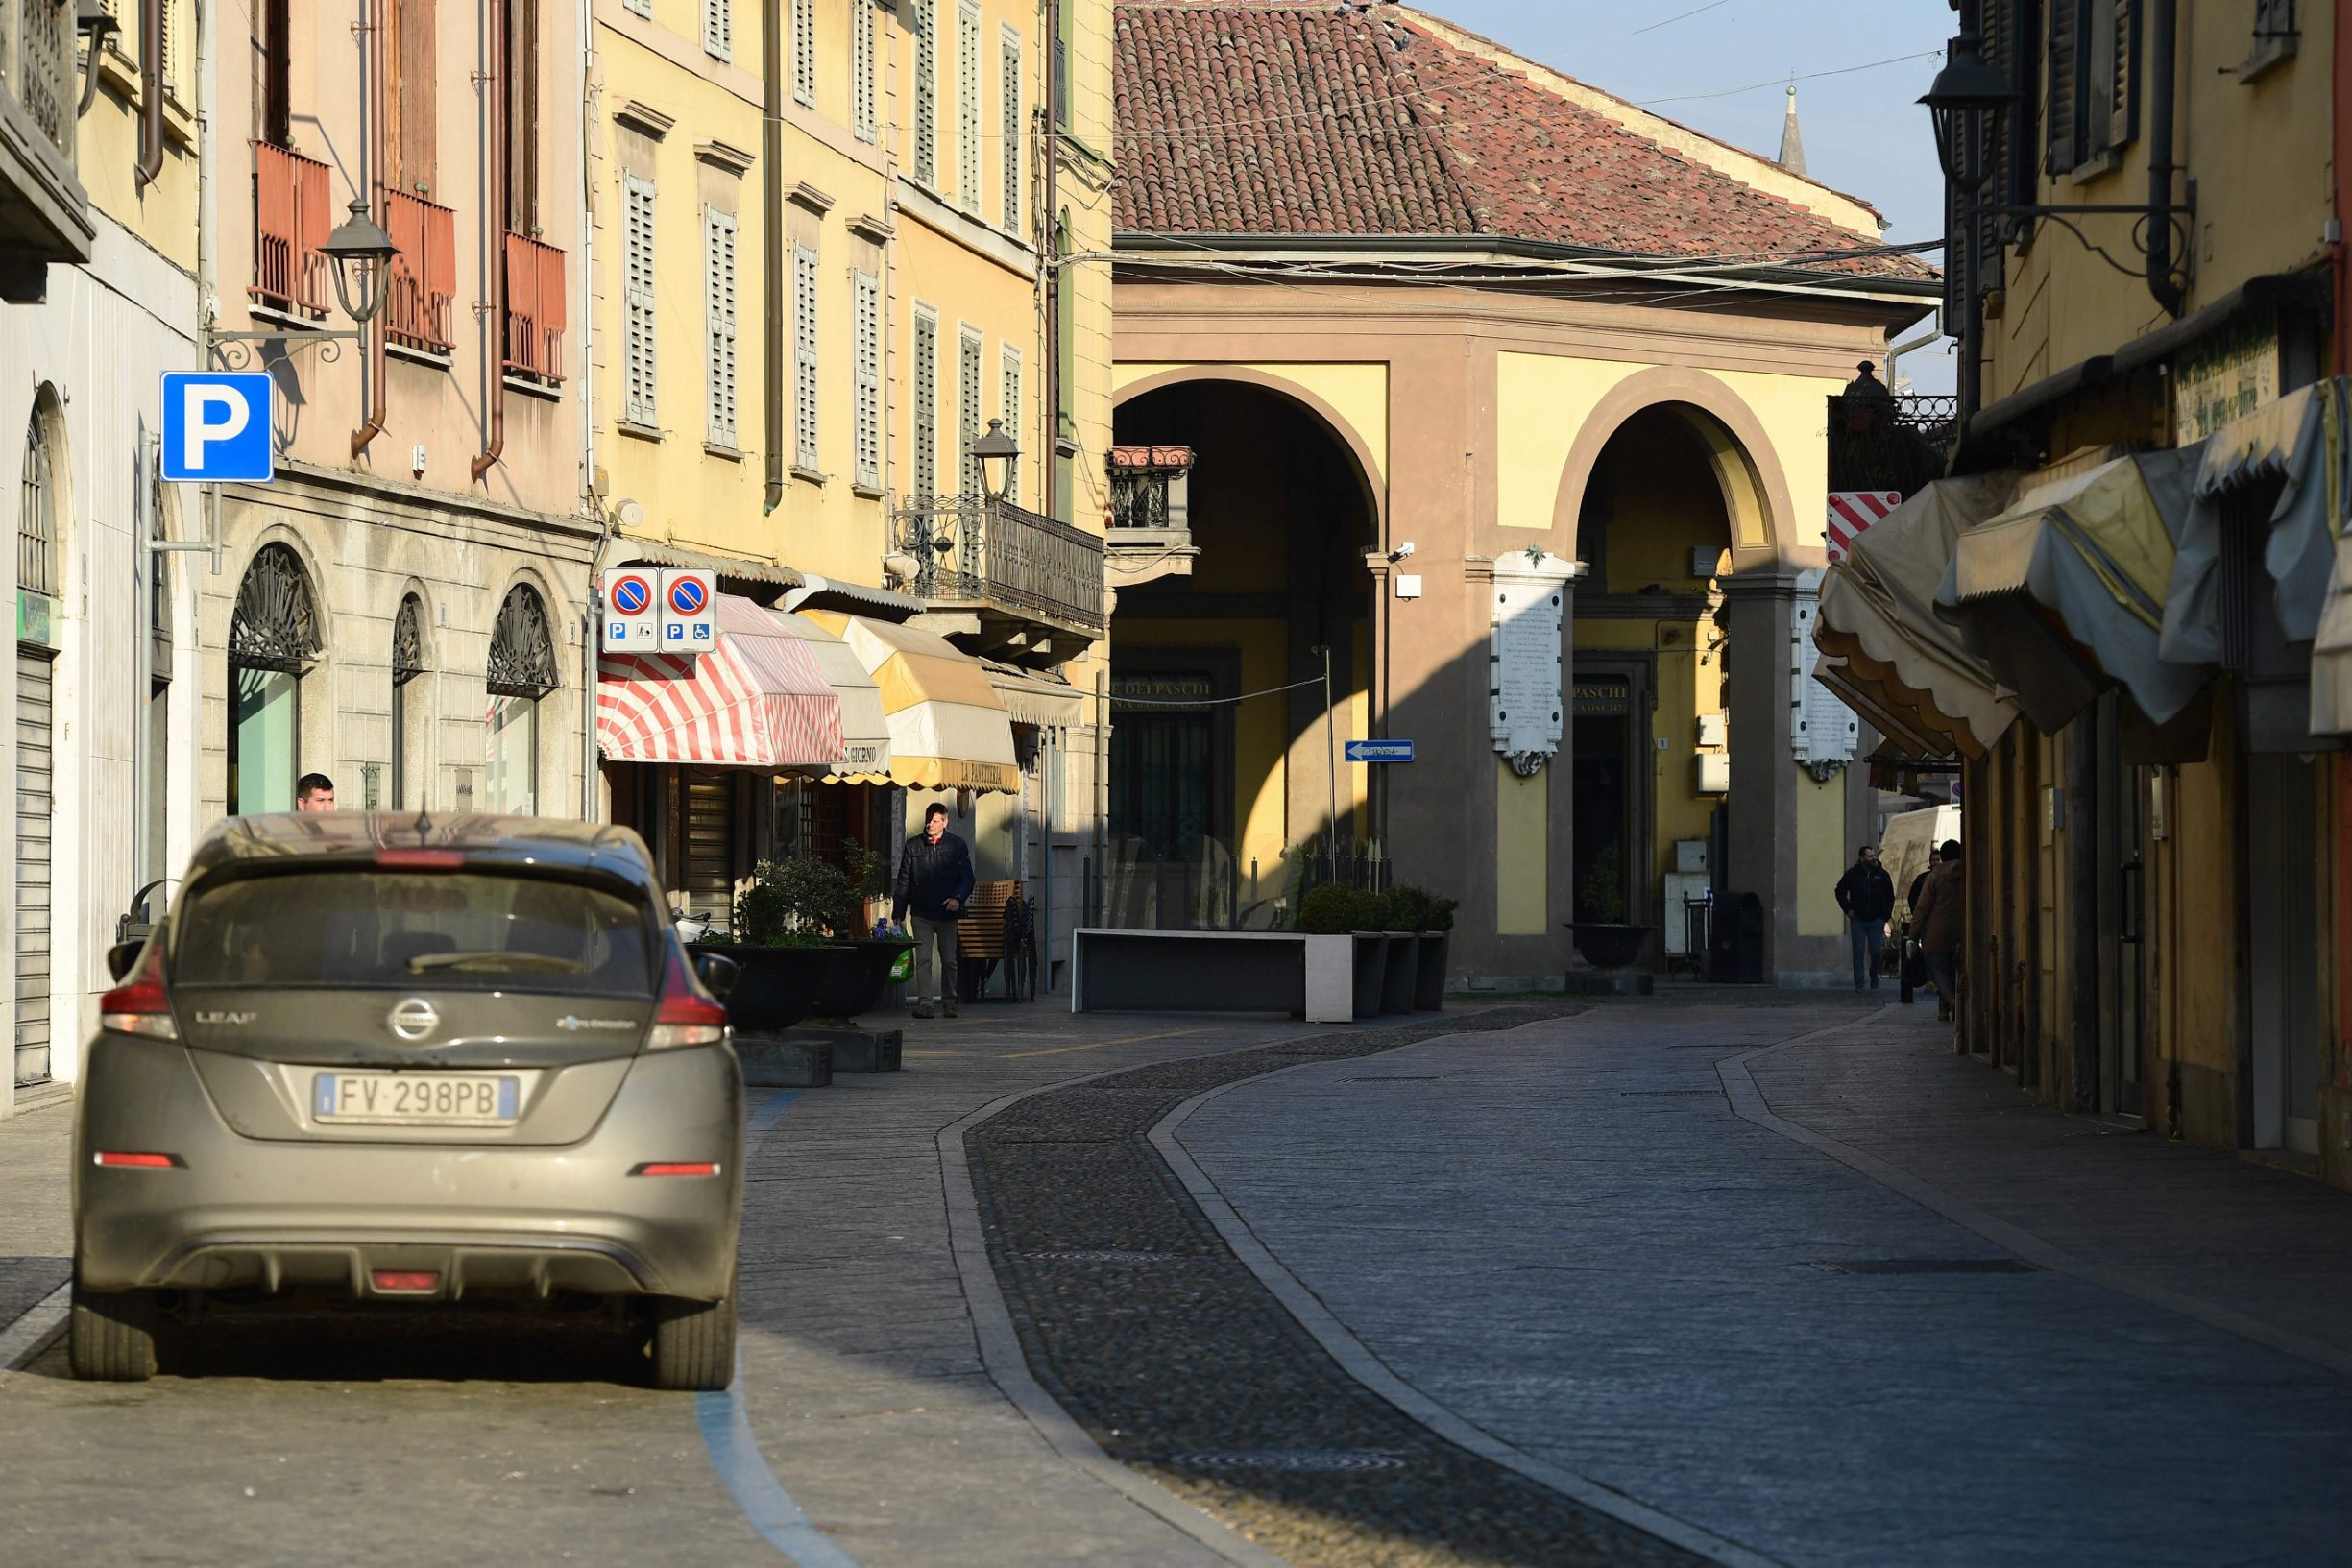 A general view shows a street in Codogno, southeast of Milan, on February 22, 2020. - An Italian man became the first European to die after being infected with the coronavirus on February 21, just hours after 10 towns in the country were locked down following a flurry of new cases. (Photo by Miguel MEDINA / AFP)